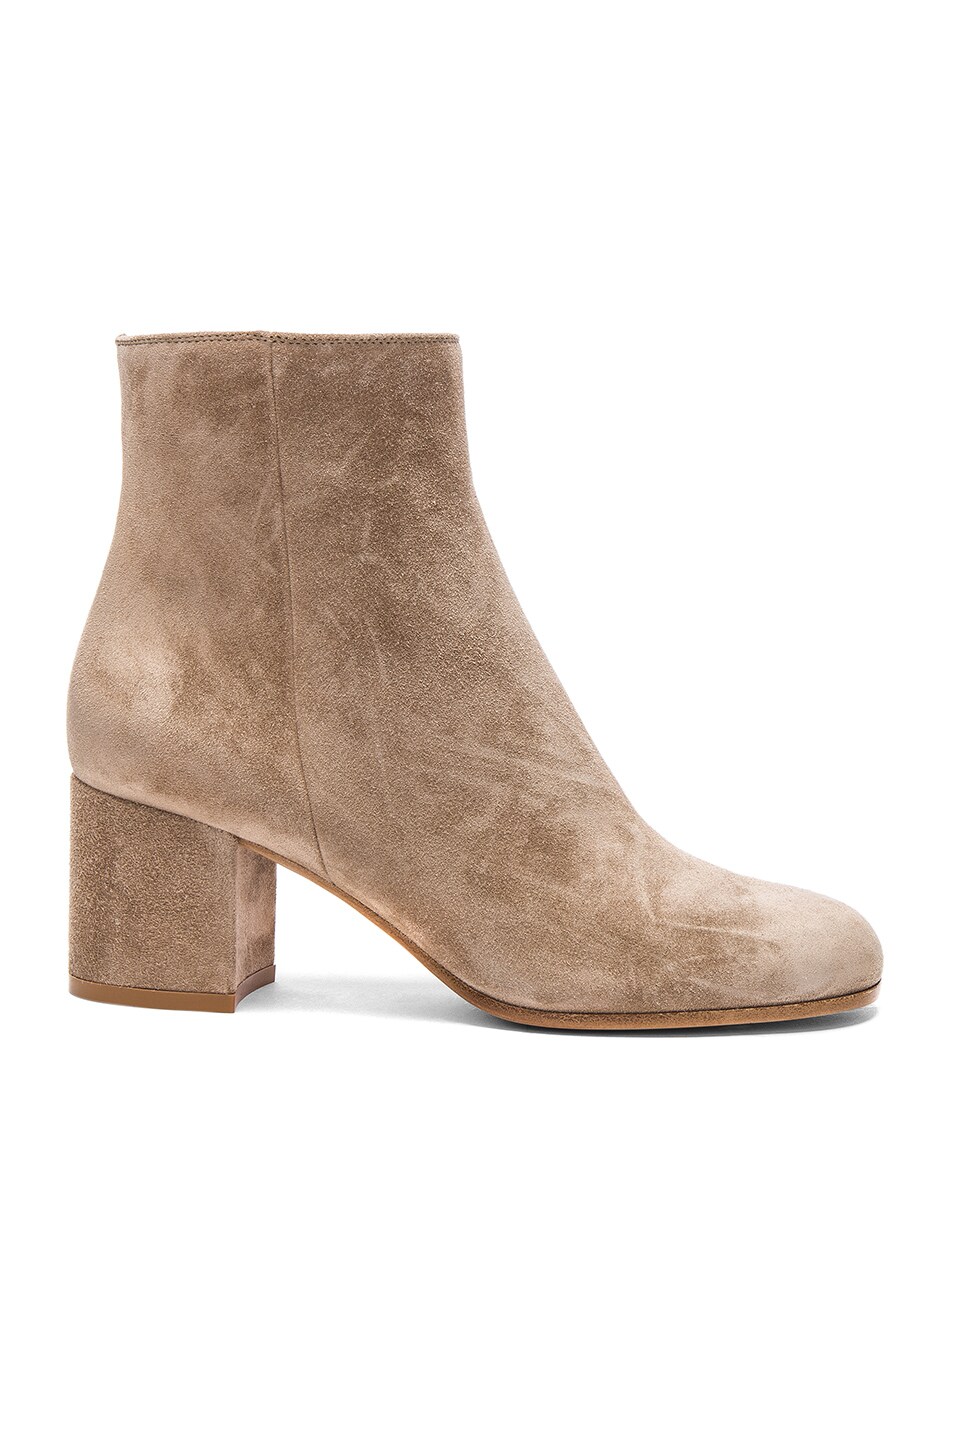 Image 1 of Gianvito Rossi Suede Margaux Booties in Bisque